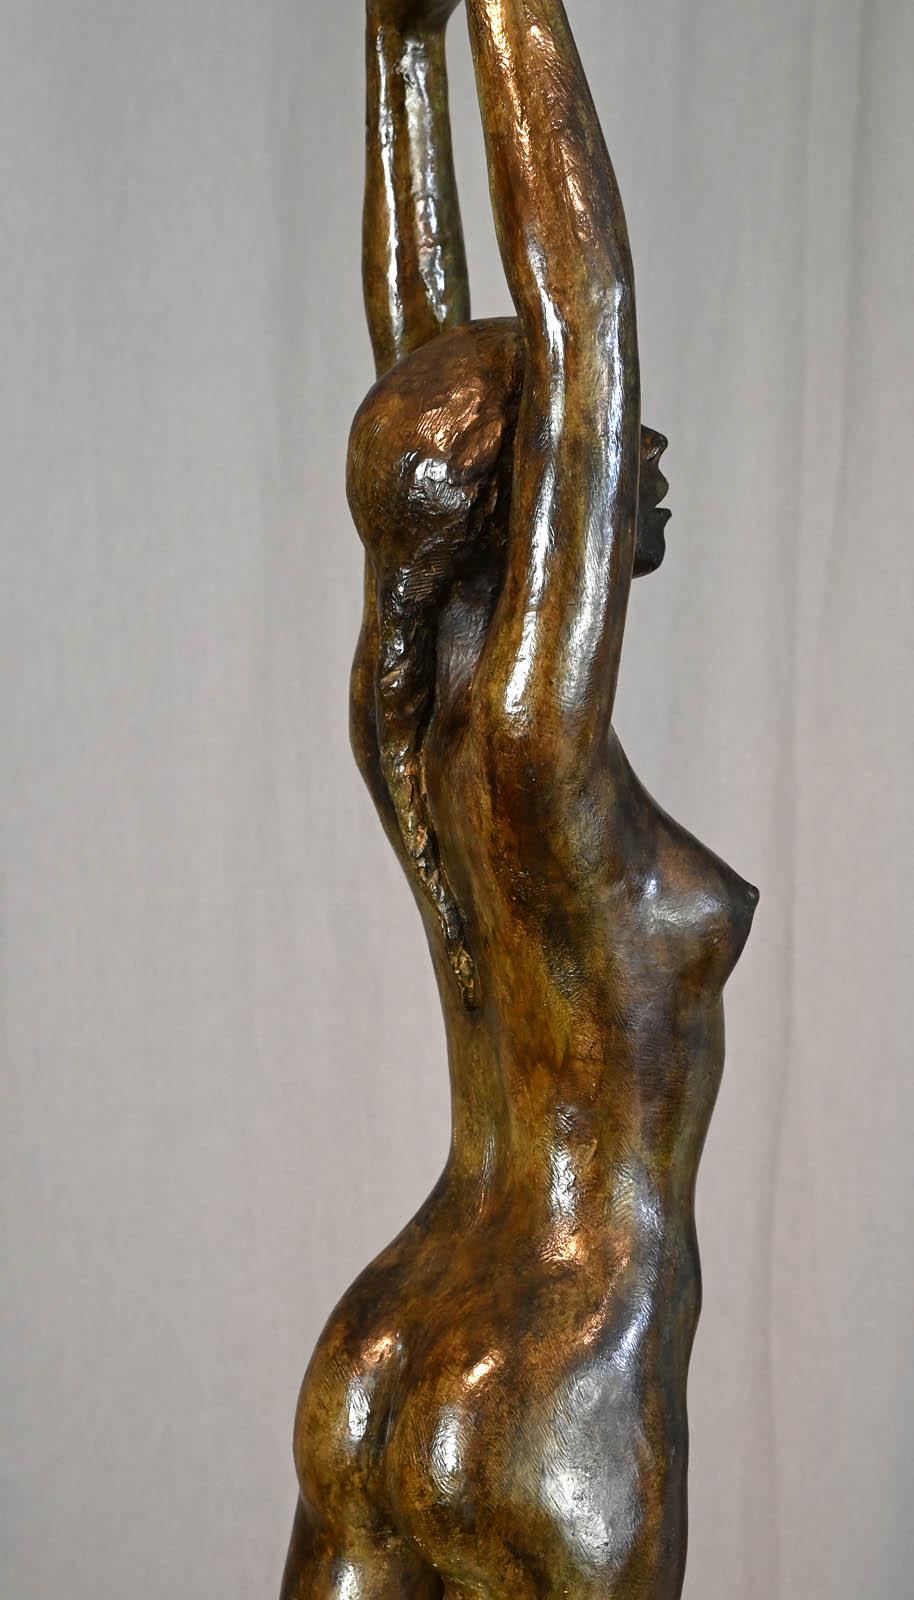 Jacques COQUILLAY (né en 1935) 

Victoire

Original bronze
Size : 105 x 22 x 20 cm
Copy No. 1/8
Signature and numbered on the base.
Original bronze made with “lost wax”
The edition of the bronzes is limited by law to 8 copies, supplemented by 4